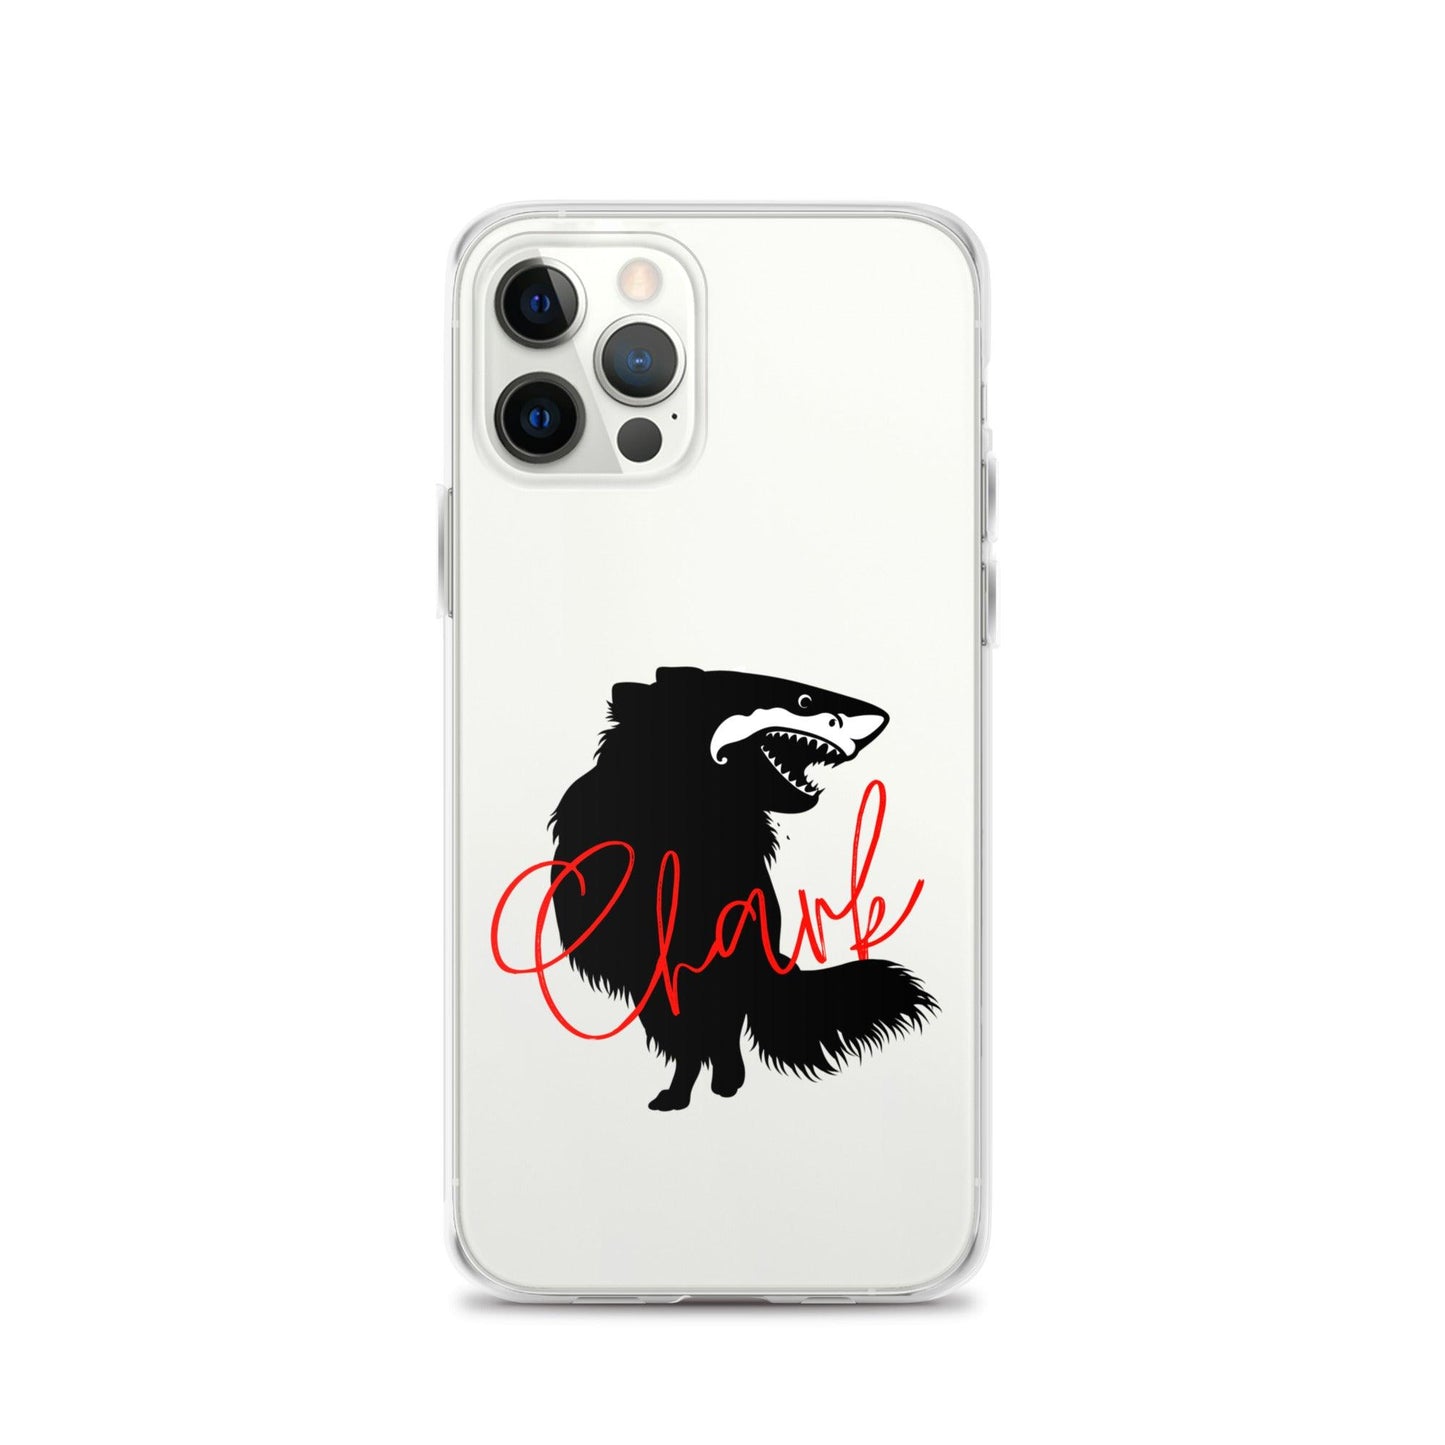 Chihuahua + Shark = Chark Clear iPhone case with the black silhouette of a longhaired chihuahua with the face of a great white shark - mouth open to show off jaws lined with lots of sharp white teeth. The word "Chark" is artfully placed in red cursive font over the image. For trendy chi lovers. iPhone 12 pro case.